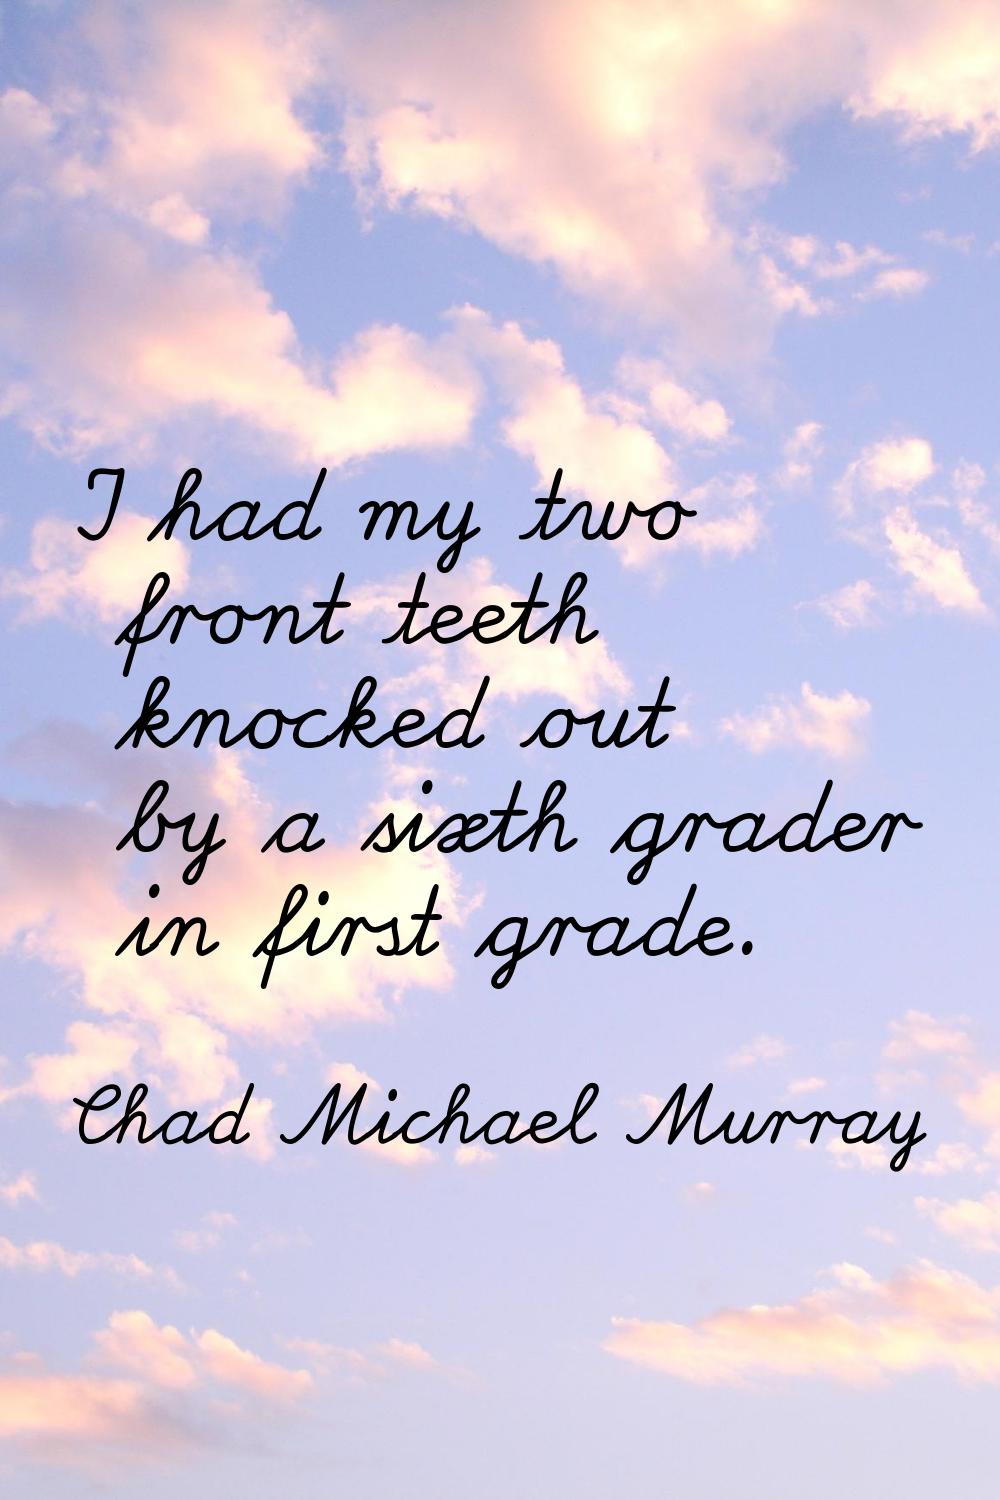 I had my two front teeth knocked out by a sixth grader in first grade.